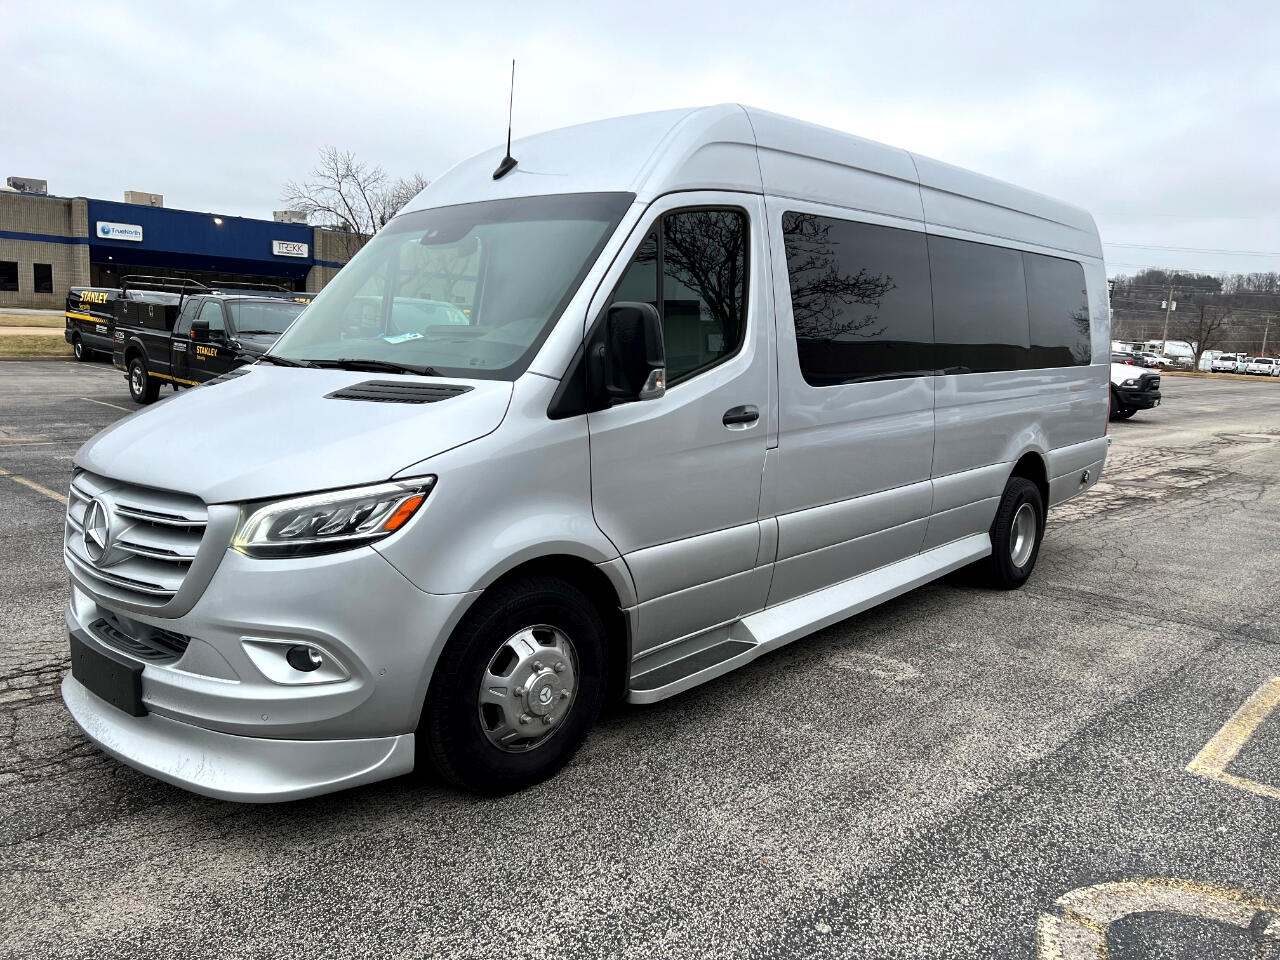 New and Quality Preowned Luxury Mercedes Benz, Sprinter Vans in Elkhart IN, Midwest Automotive Designs Dealer